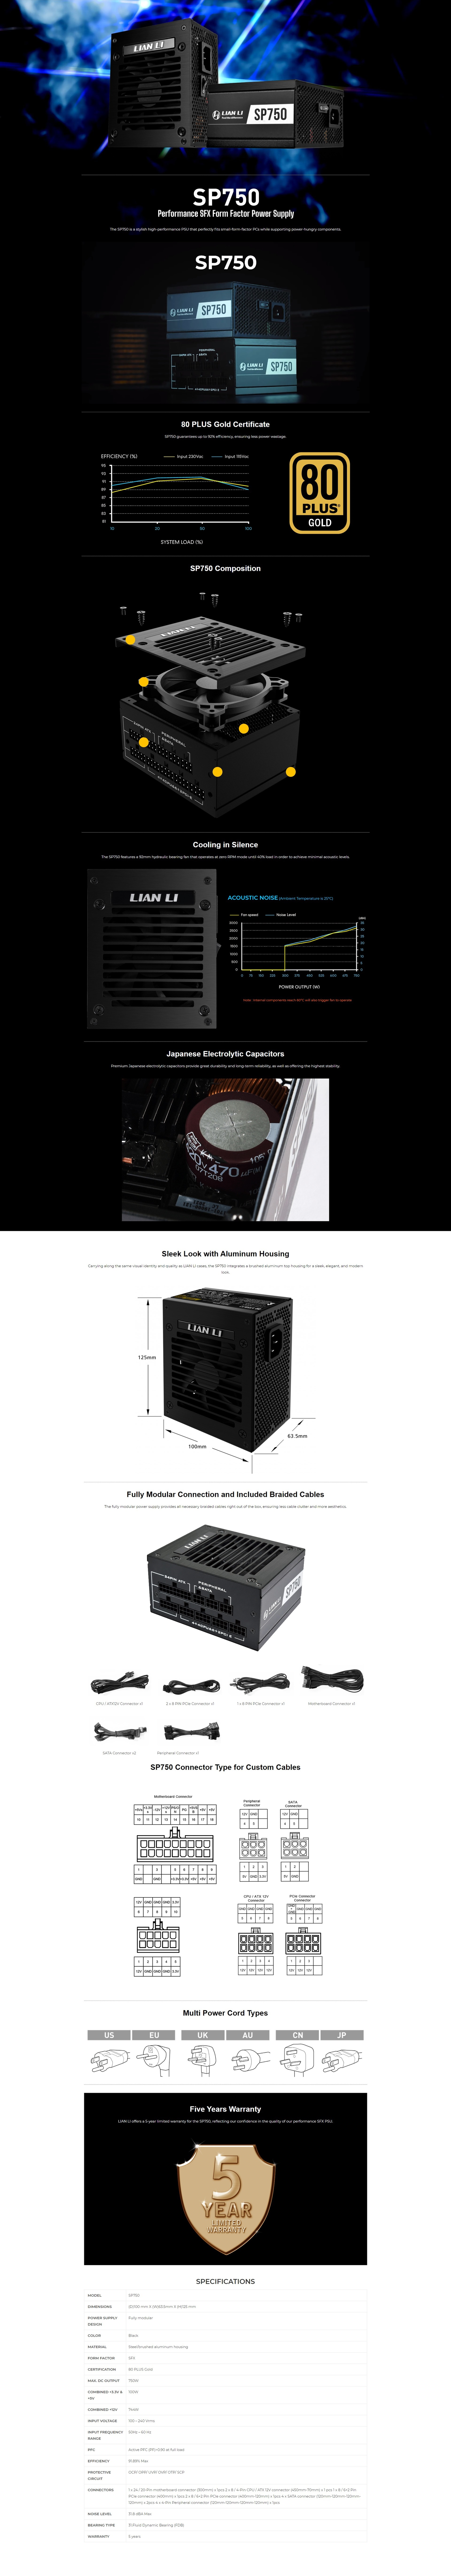 A large marketing image providing additional information about the product Lian Li SP750 750W Gold SFX Modular PSU - Black - Additional alt info not provided